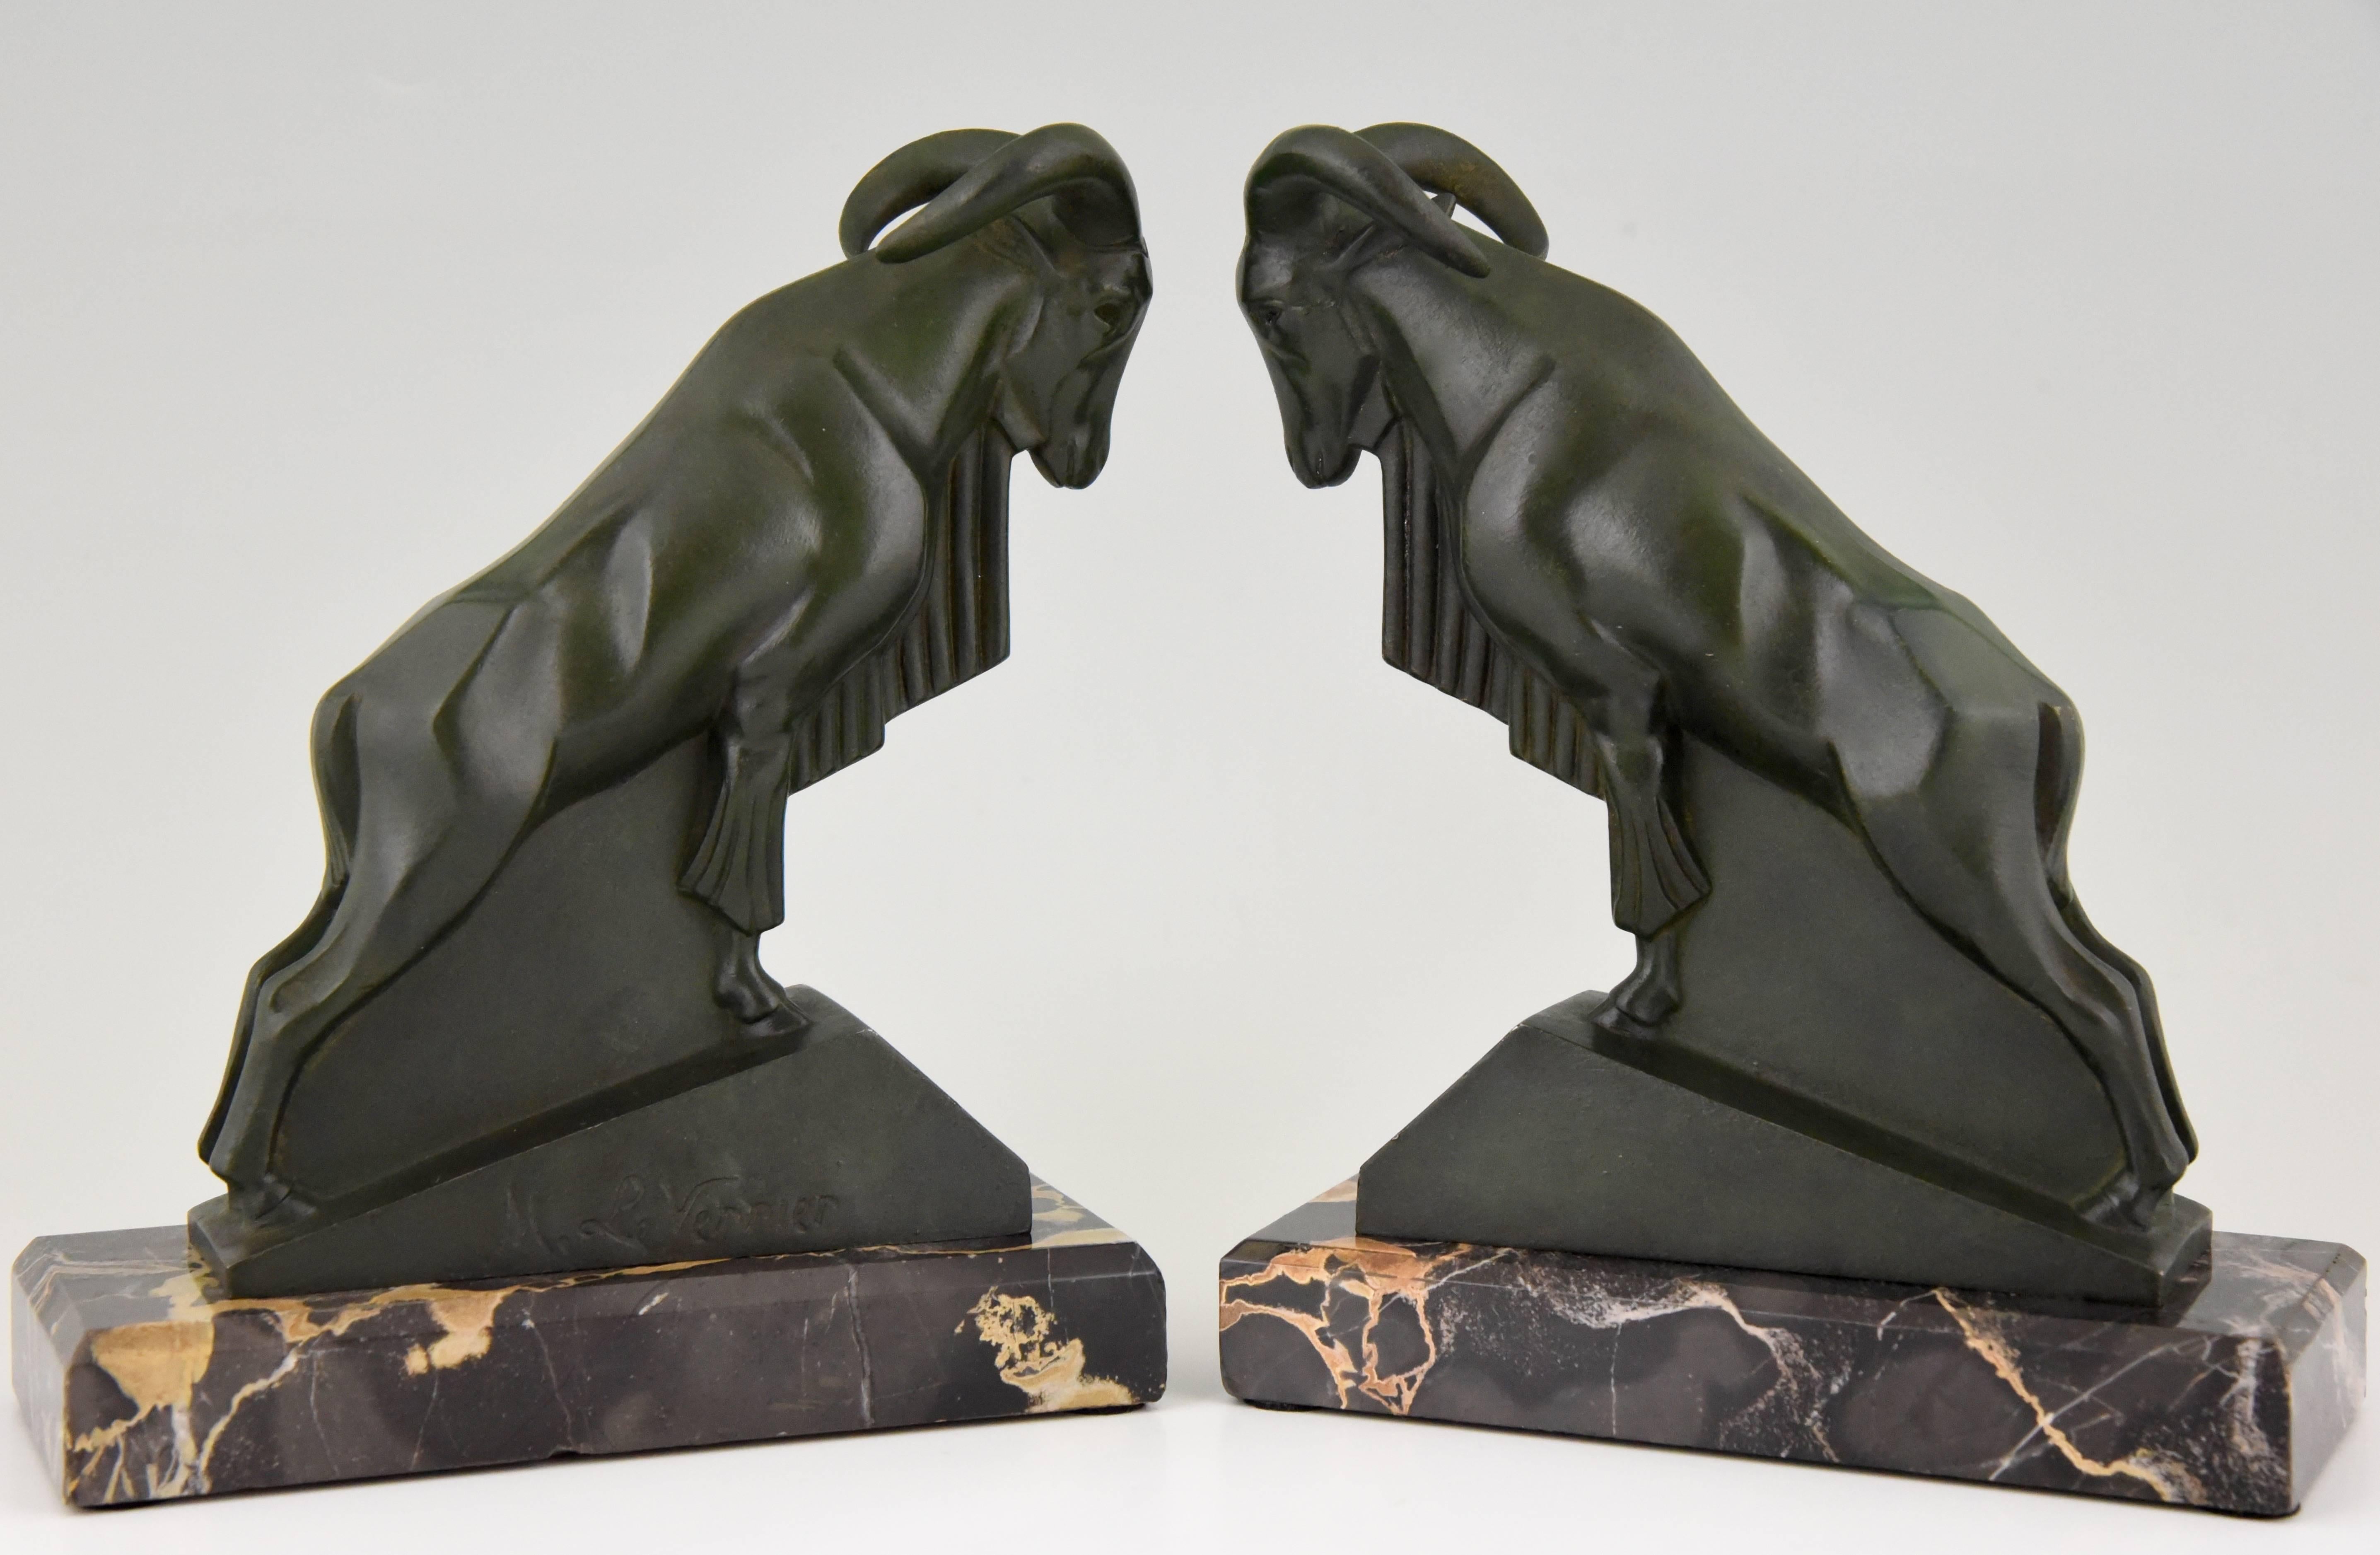 Beautiful pair of Art Deco bookends in the shape of rams by the French artist Max Le Verrier.

Signature/ Marks: M. Le Verrier.
Style: Art Deco
Date: 1930
Material: Green patinated art metal. Portor marble bases.
Origin: France
Size: H. 16.5